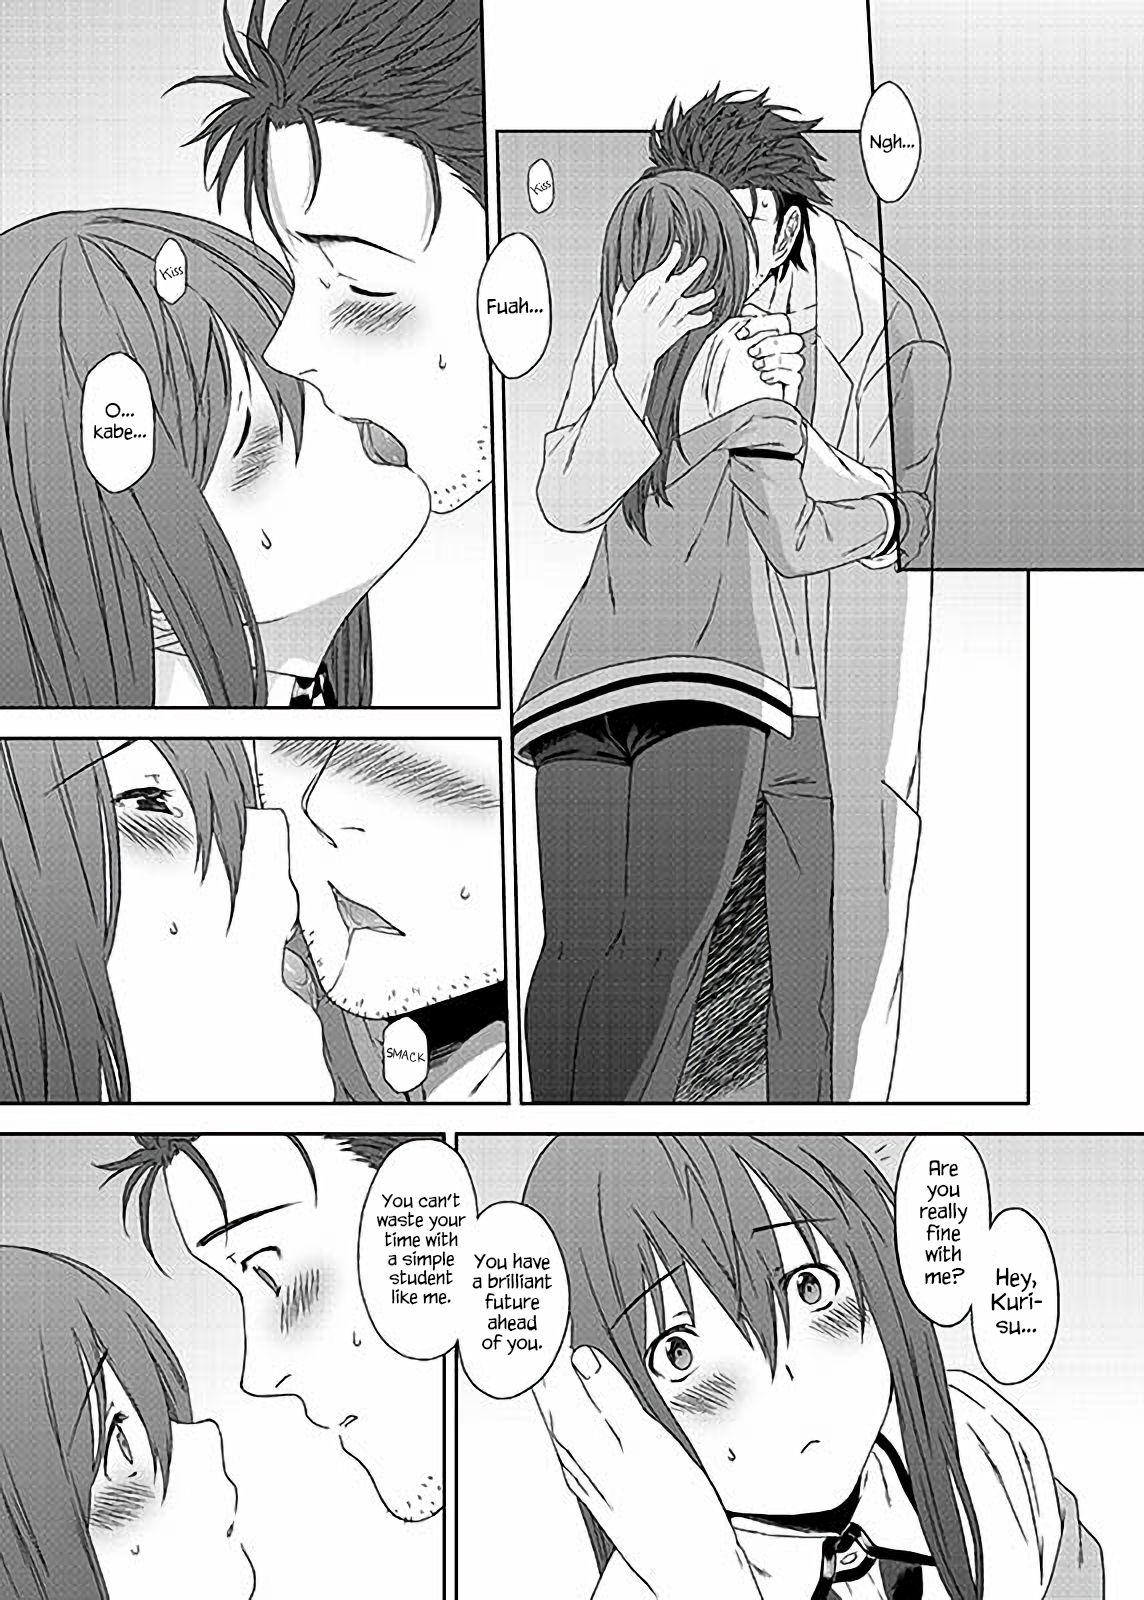 Gay Shorthair You Are There - Steinsgate Dicksucking - Page 2